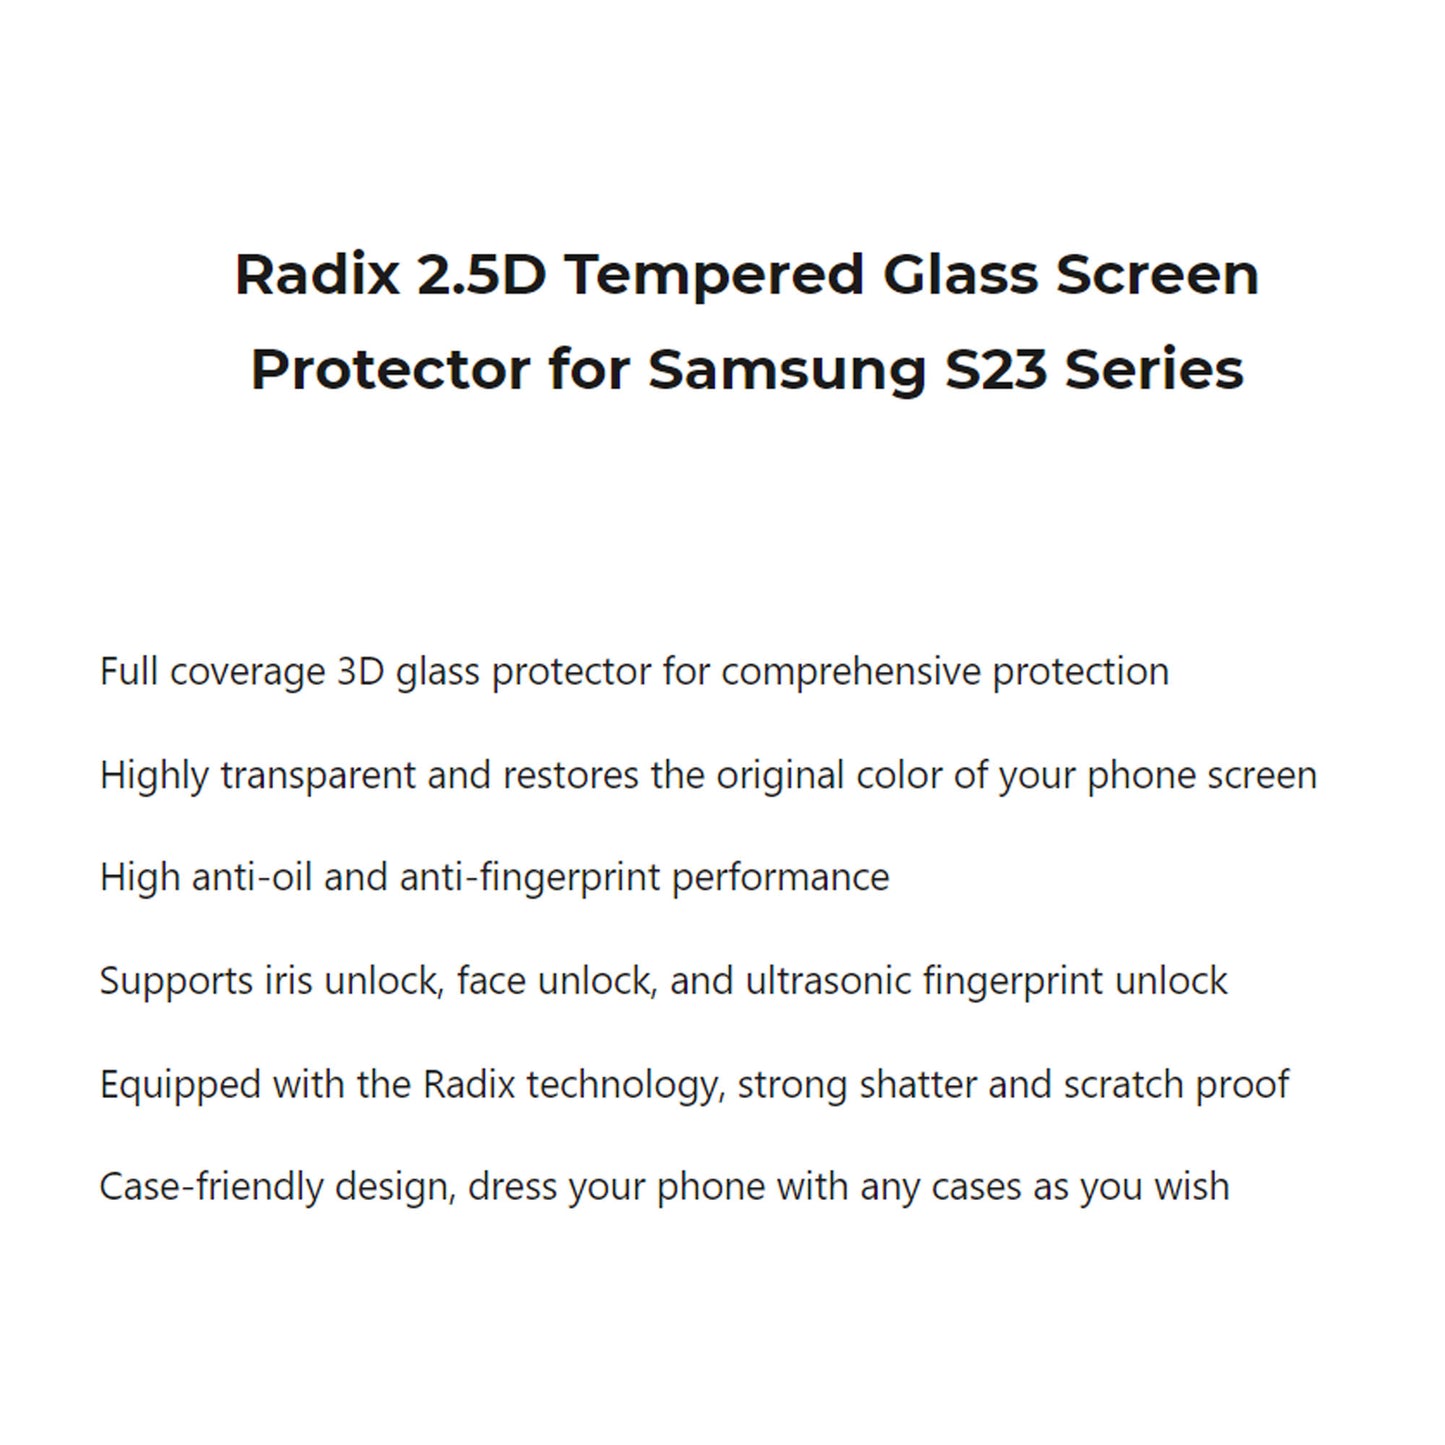 AMAZINGTHING Radix Tempered Glass for Samsung Galaxy S23 Ultra - Side Glue Screen Protector - Clear (Barcode: 4892878078238 )